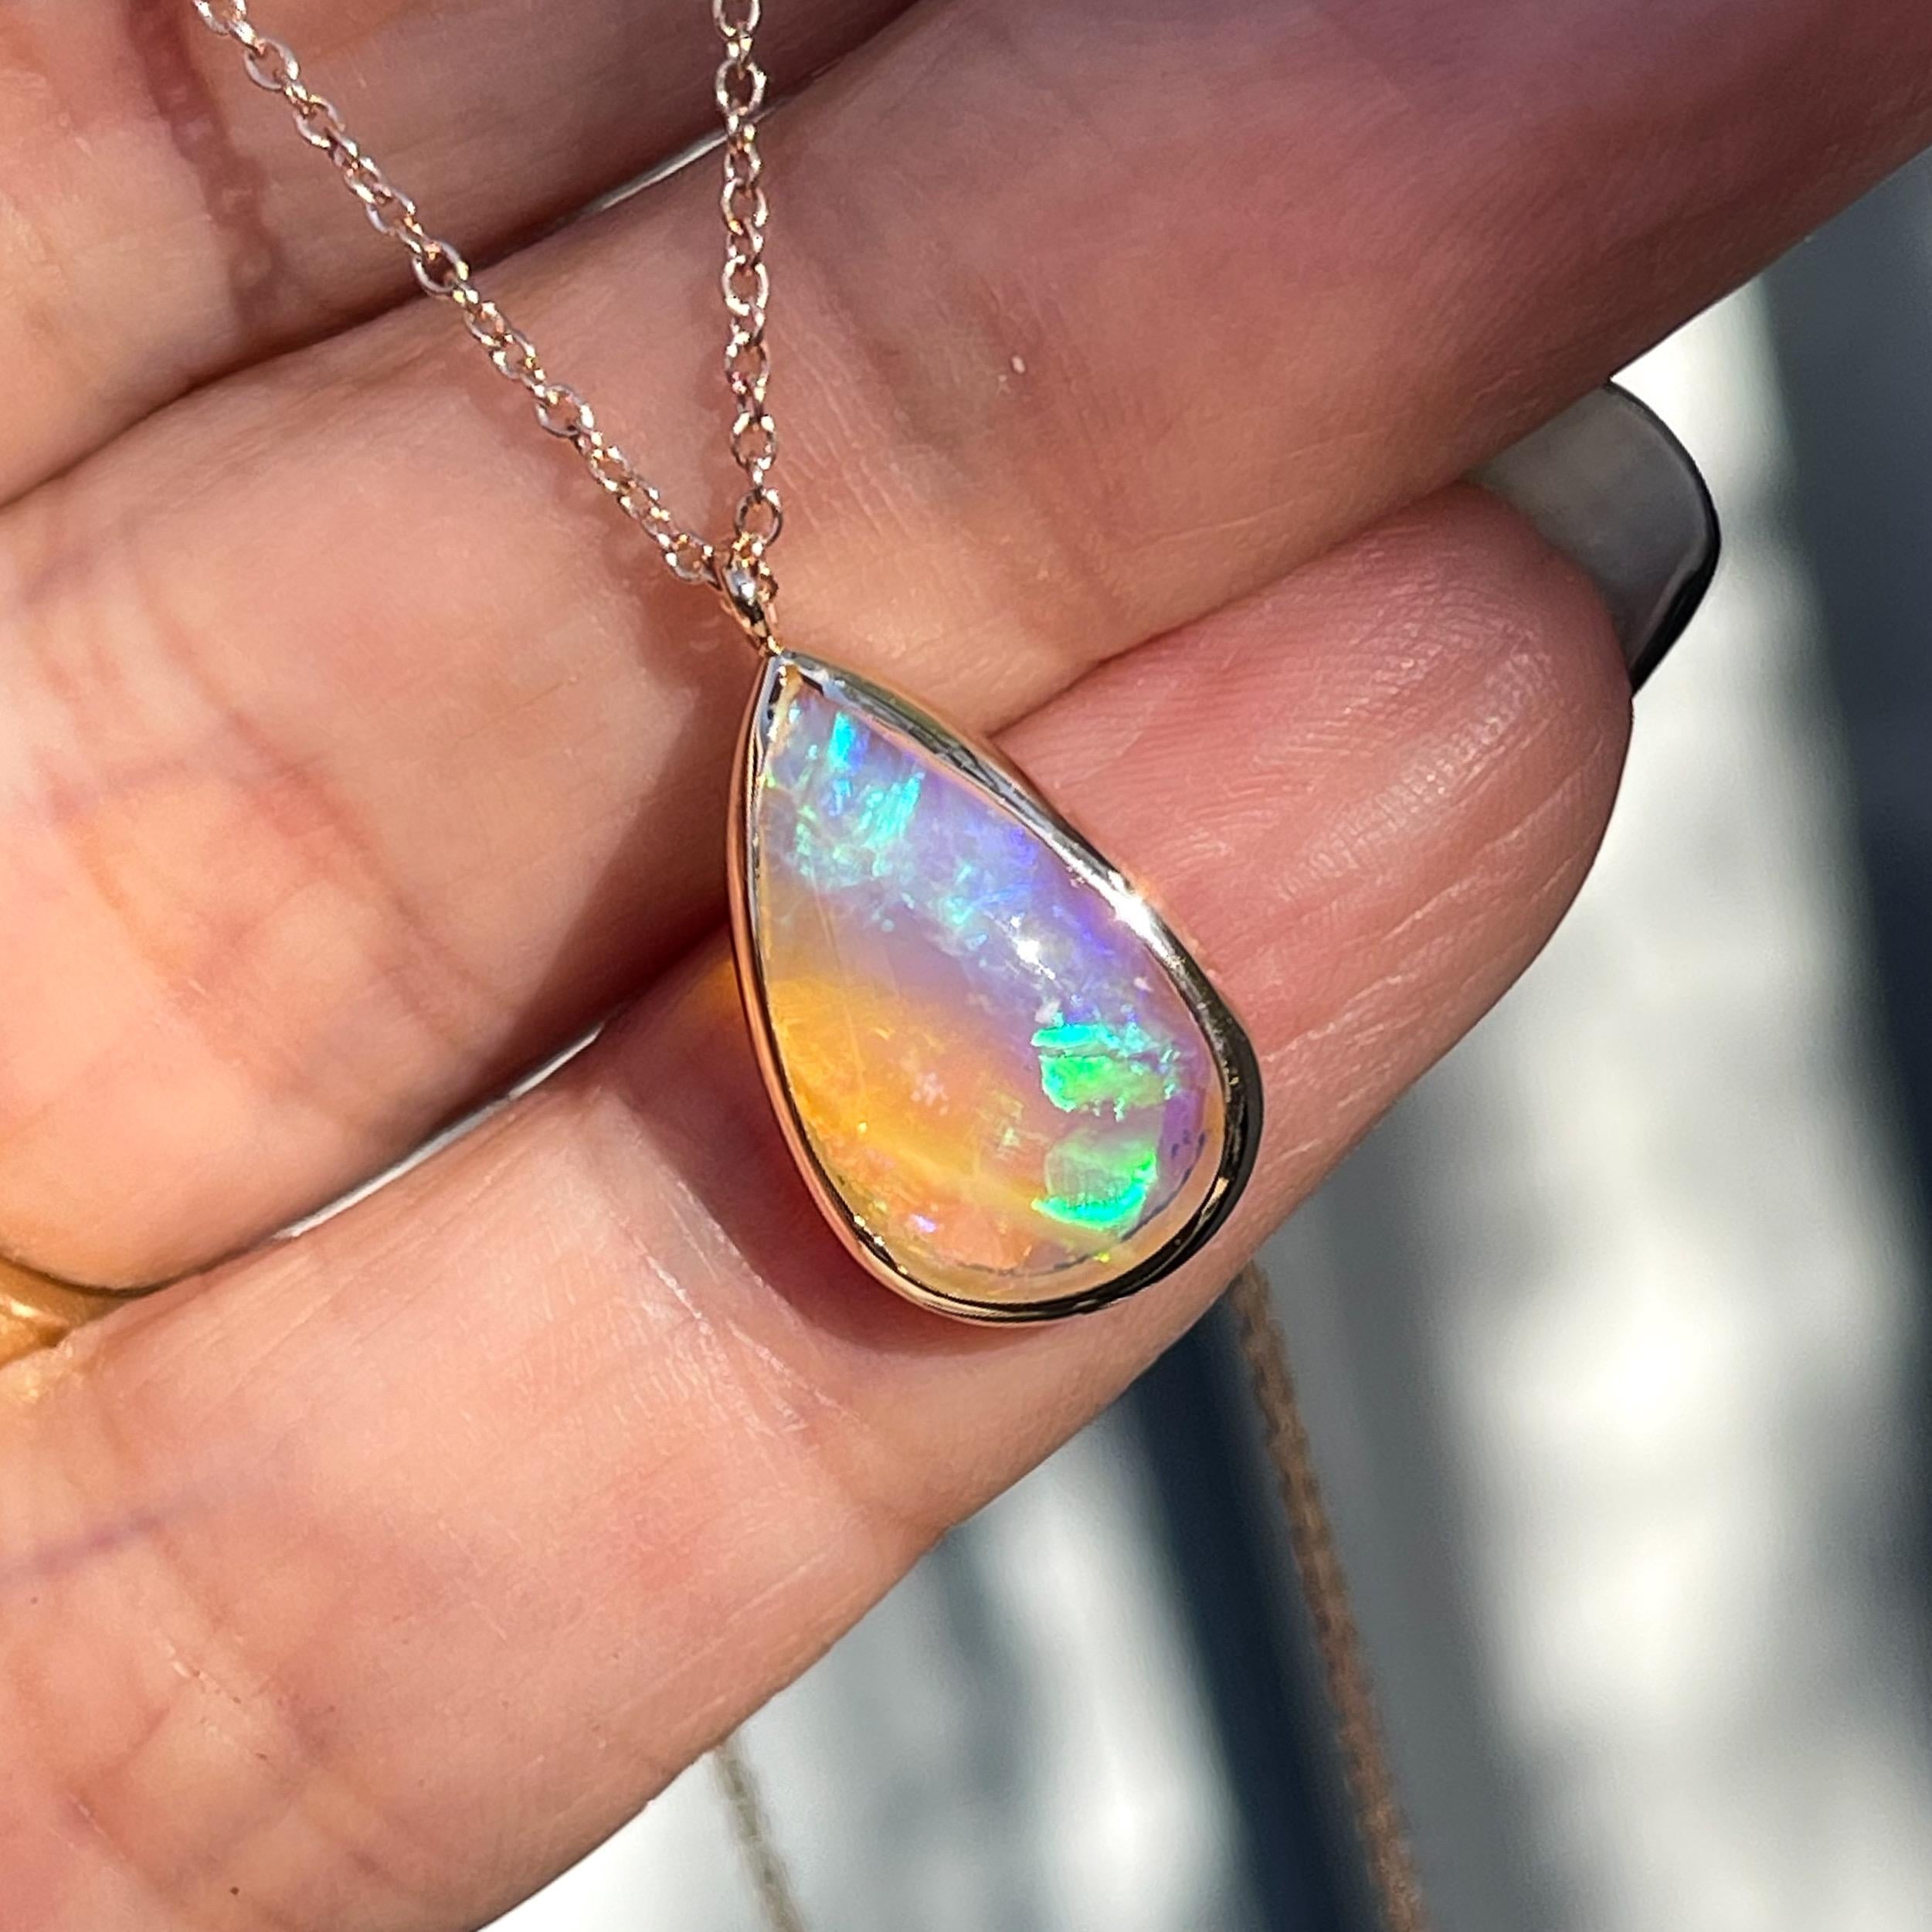 Impulsive color floods the façade of this Australian Opal Necklace. With its crystal bodice set in rose gold, the opal pendant diffuses light, allowing covert colors to emerge. Flashes of turquoise, lavender and green transiently illuminate the pink